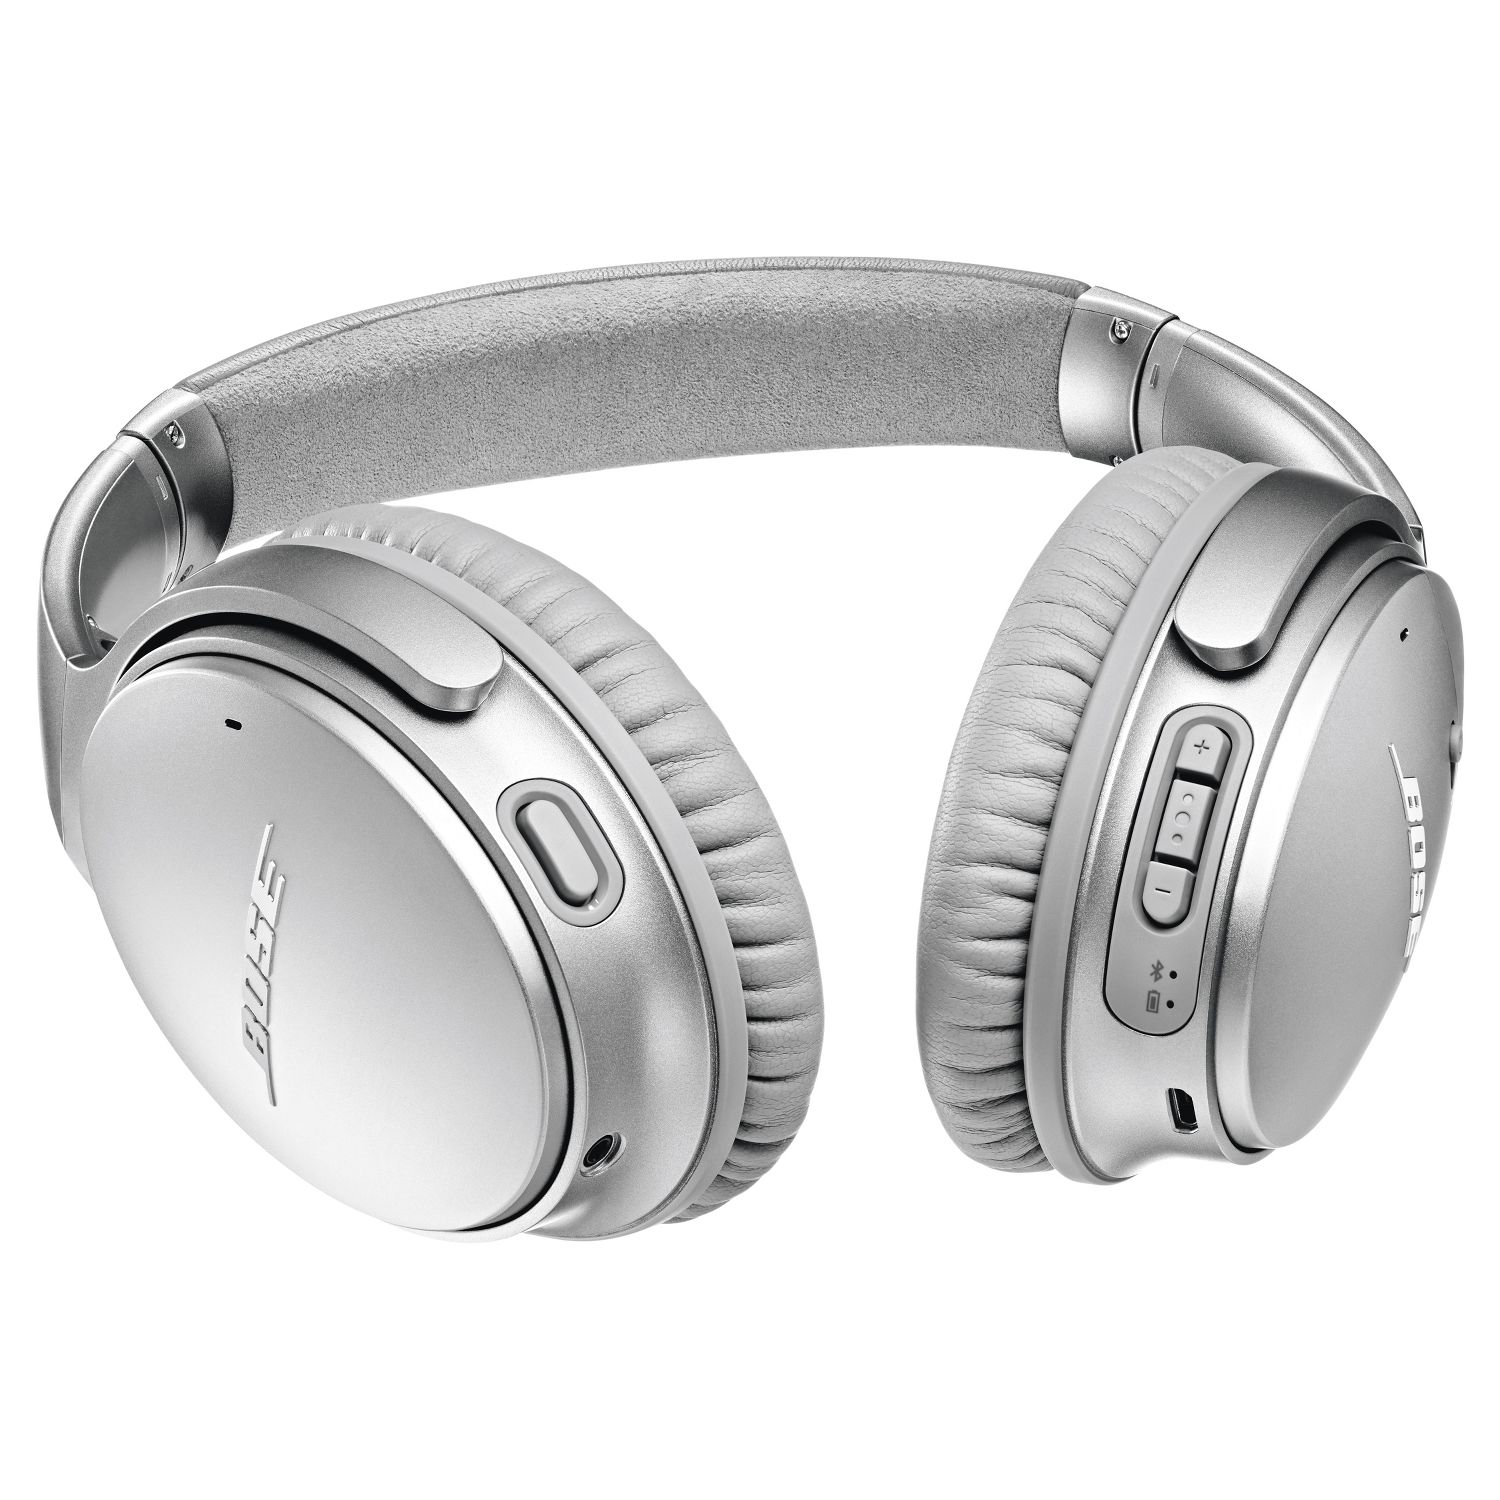 YMMV in Store Target Clearance 70% Off Bose Quietcomfort 35 Noise Cancelling Bluetooth Wireless Headphones: Target $89.99